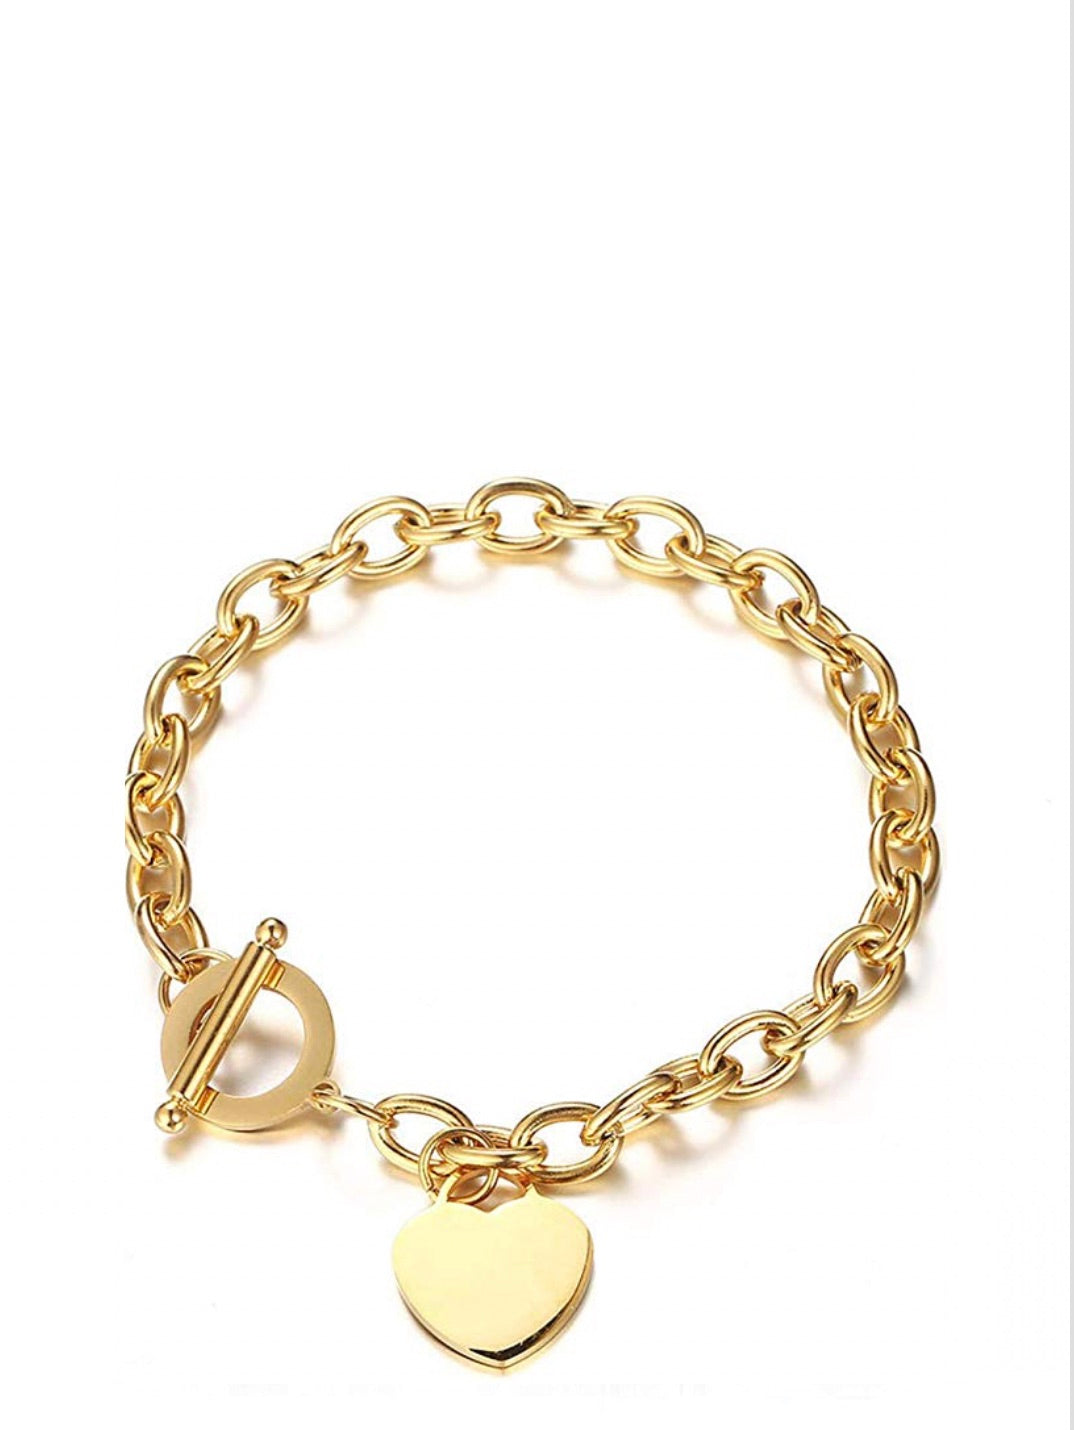 Tiffany and Co. 18 Karat Gold Dog Chain Link Bracelet and Heart Charm For  Sale at 1stDibs | tiffany bracelet gold, tiffany and co bracelet, tiffany charm  bracelet gold